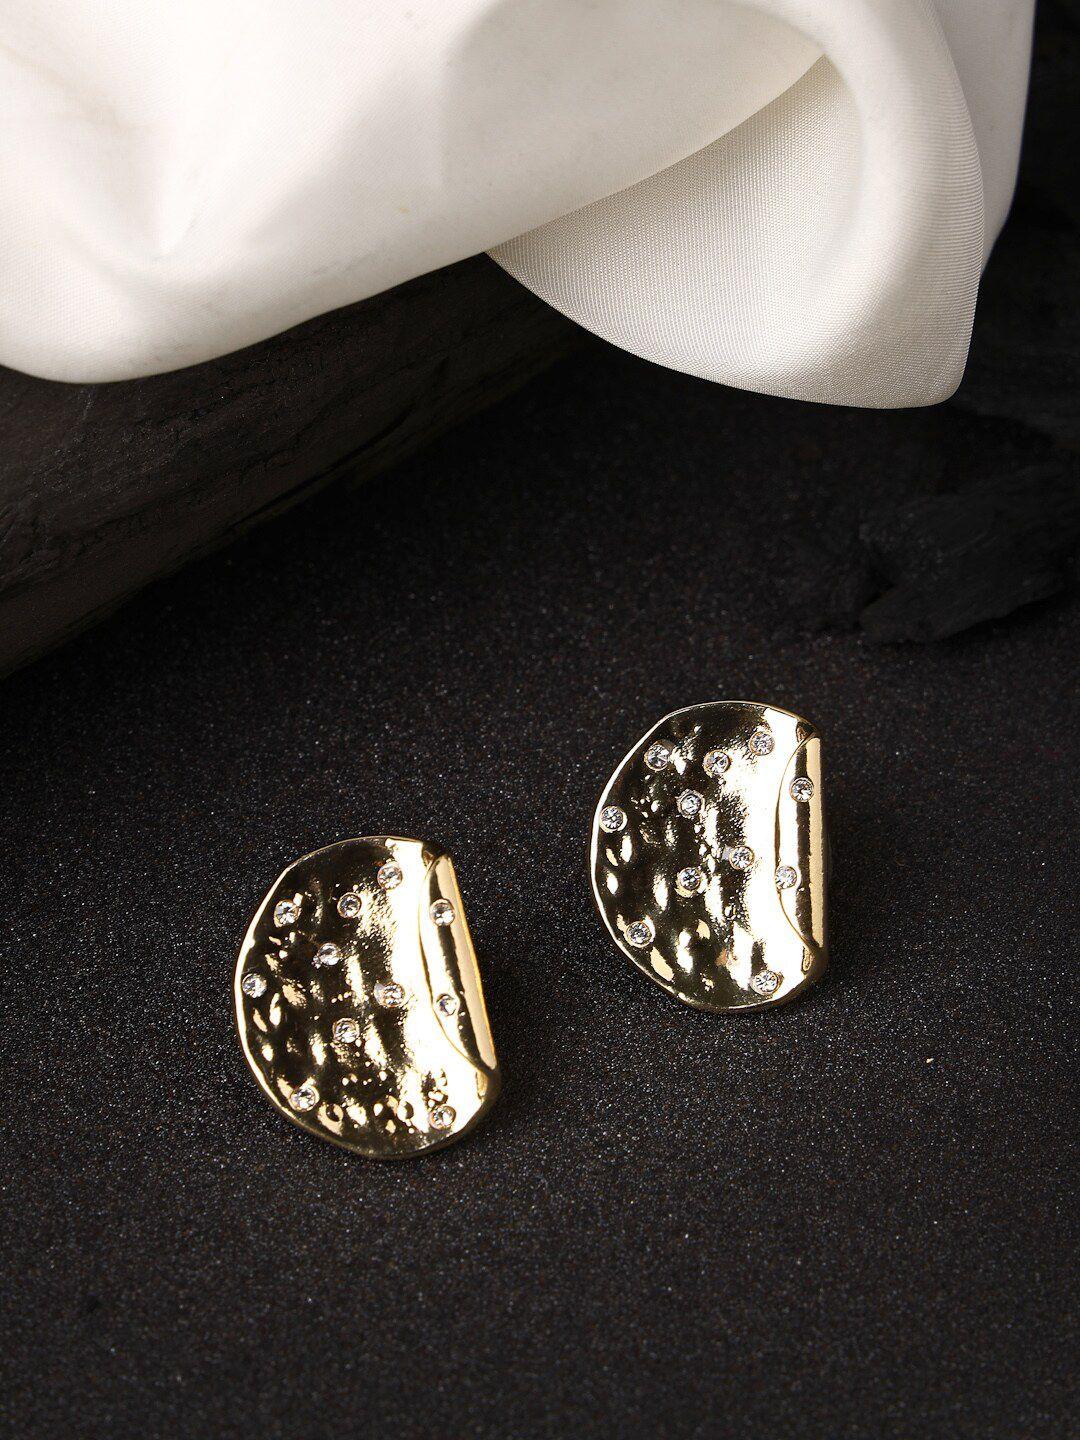 NVR Gold-Plated Artificial Stones Studded Studs Earrings